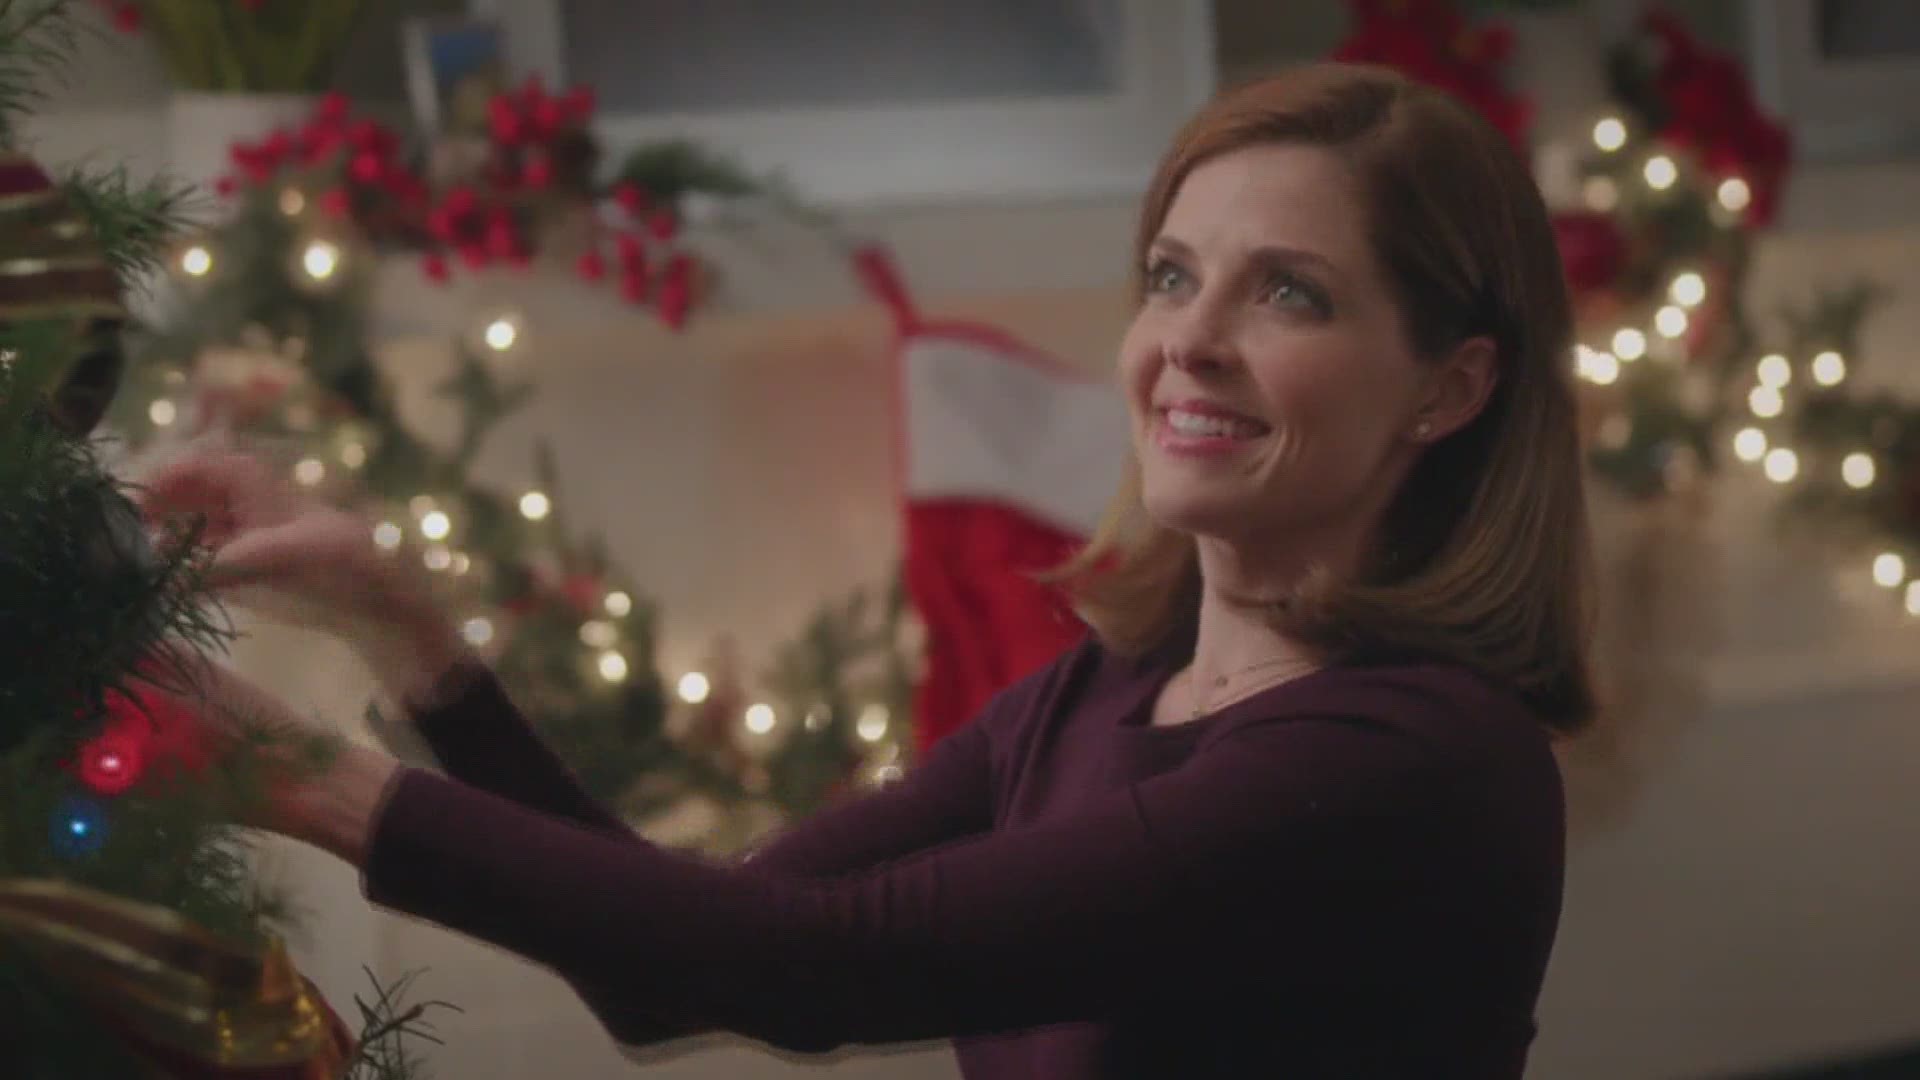 Here's your complete Hallmark Christmas movie schedule for 2020